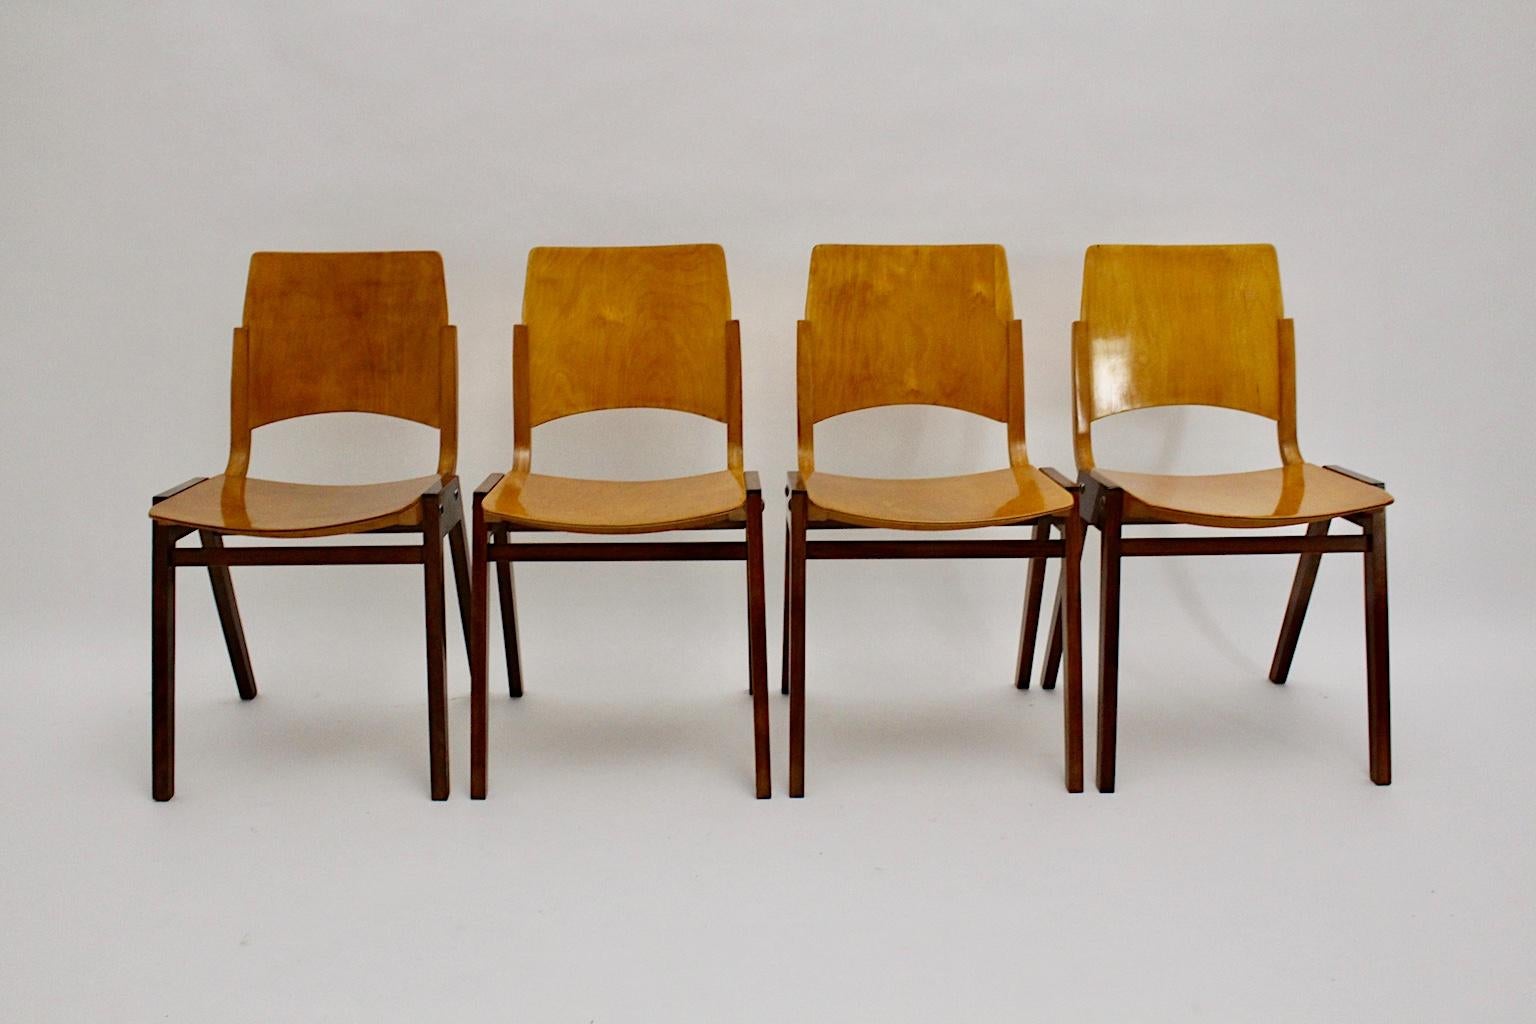 Mid Century Modern set of four bicolor dining chairs, which were designed by Roland Rainer and executed by Emil & Alfred Pollak, Vienna.
The presented dining chairs were designed for the backstage area for the Viennese City Hall ( build from